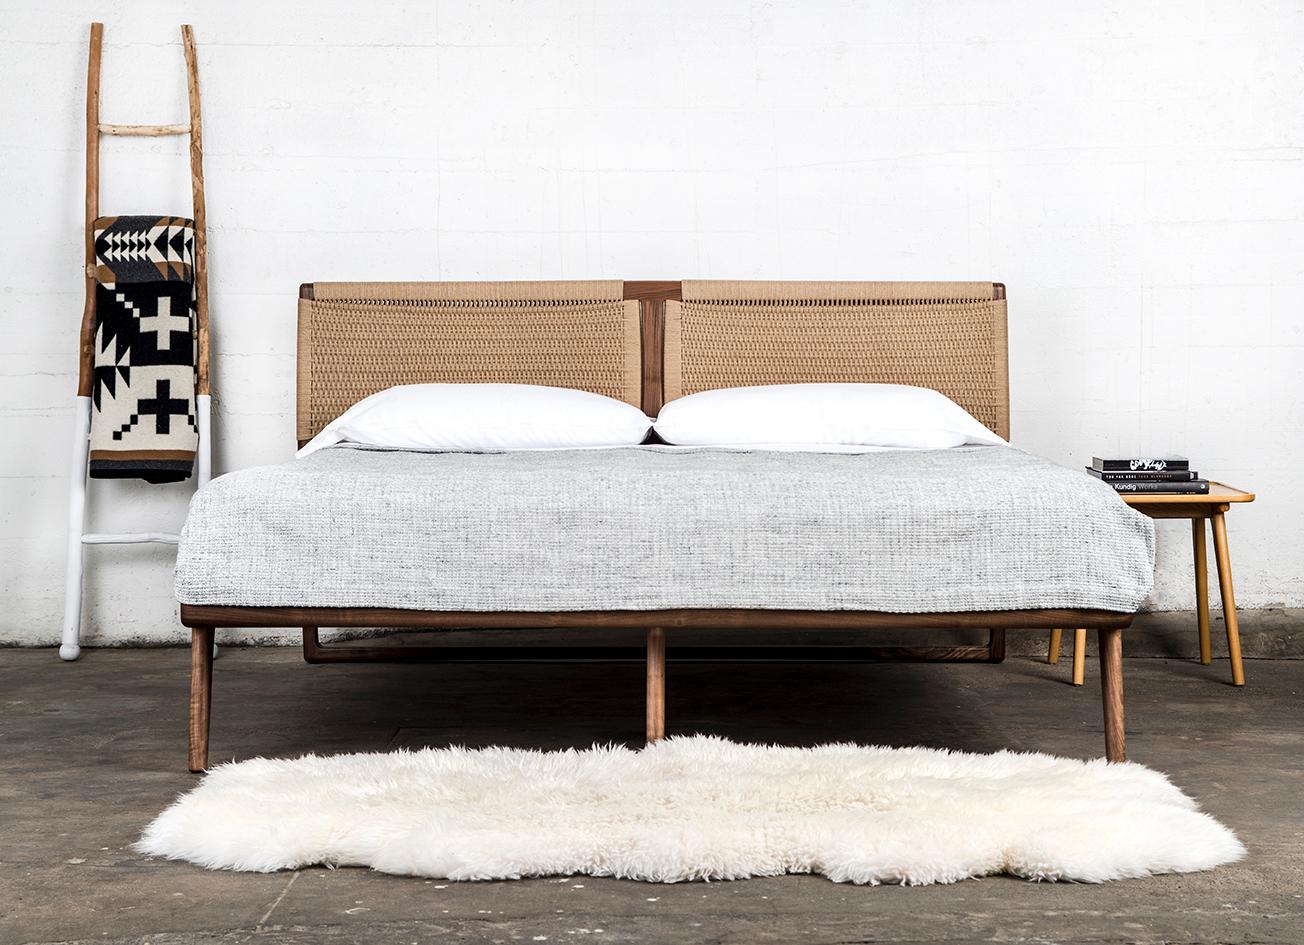 This listing is for a Queen Rian Bed in Walnut with Kraft Danish Cord. Custom options available. 

A good bed is hard to find, but a Semigood bed is hard to beat. The Rian Bed features a unique two panel woven Danish cord headboard making for one of